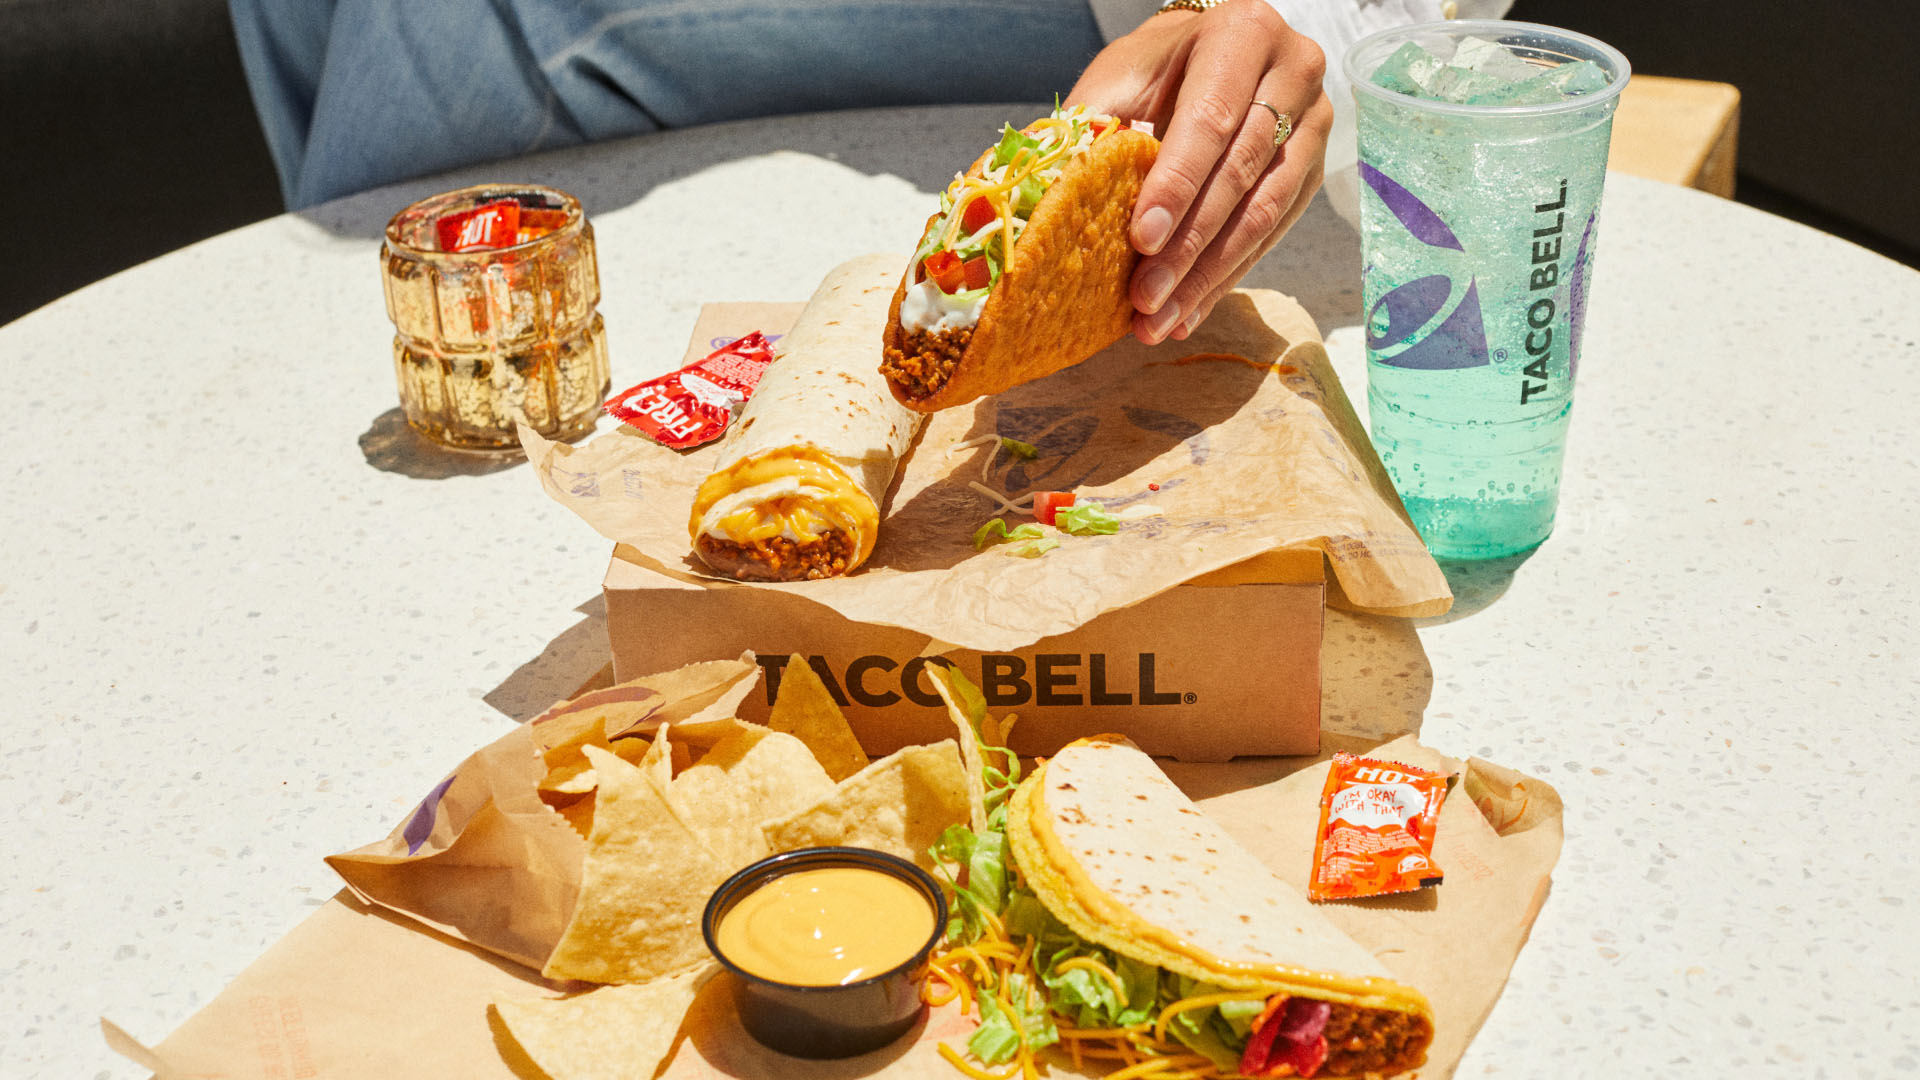 Taco Bell fires another shot in the price war with a  box